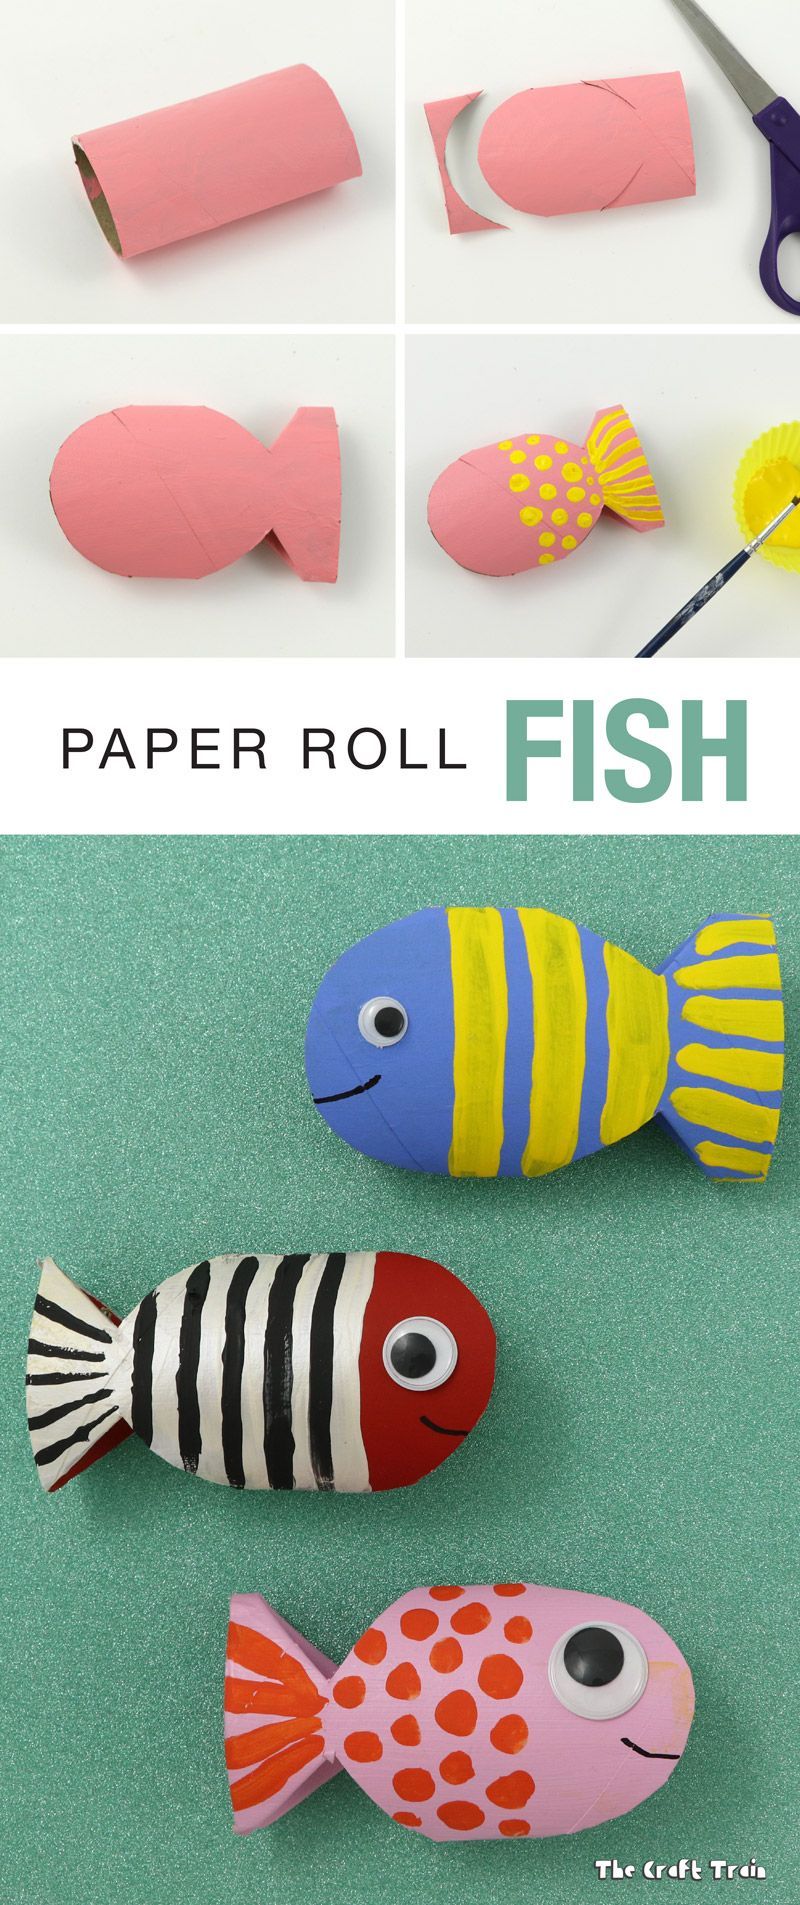 Paper roll fish recycling craft